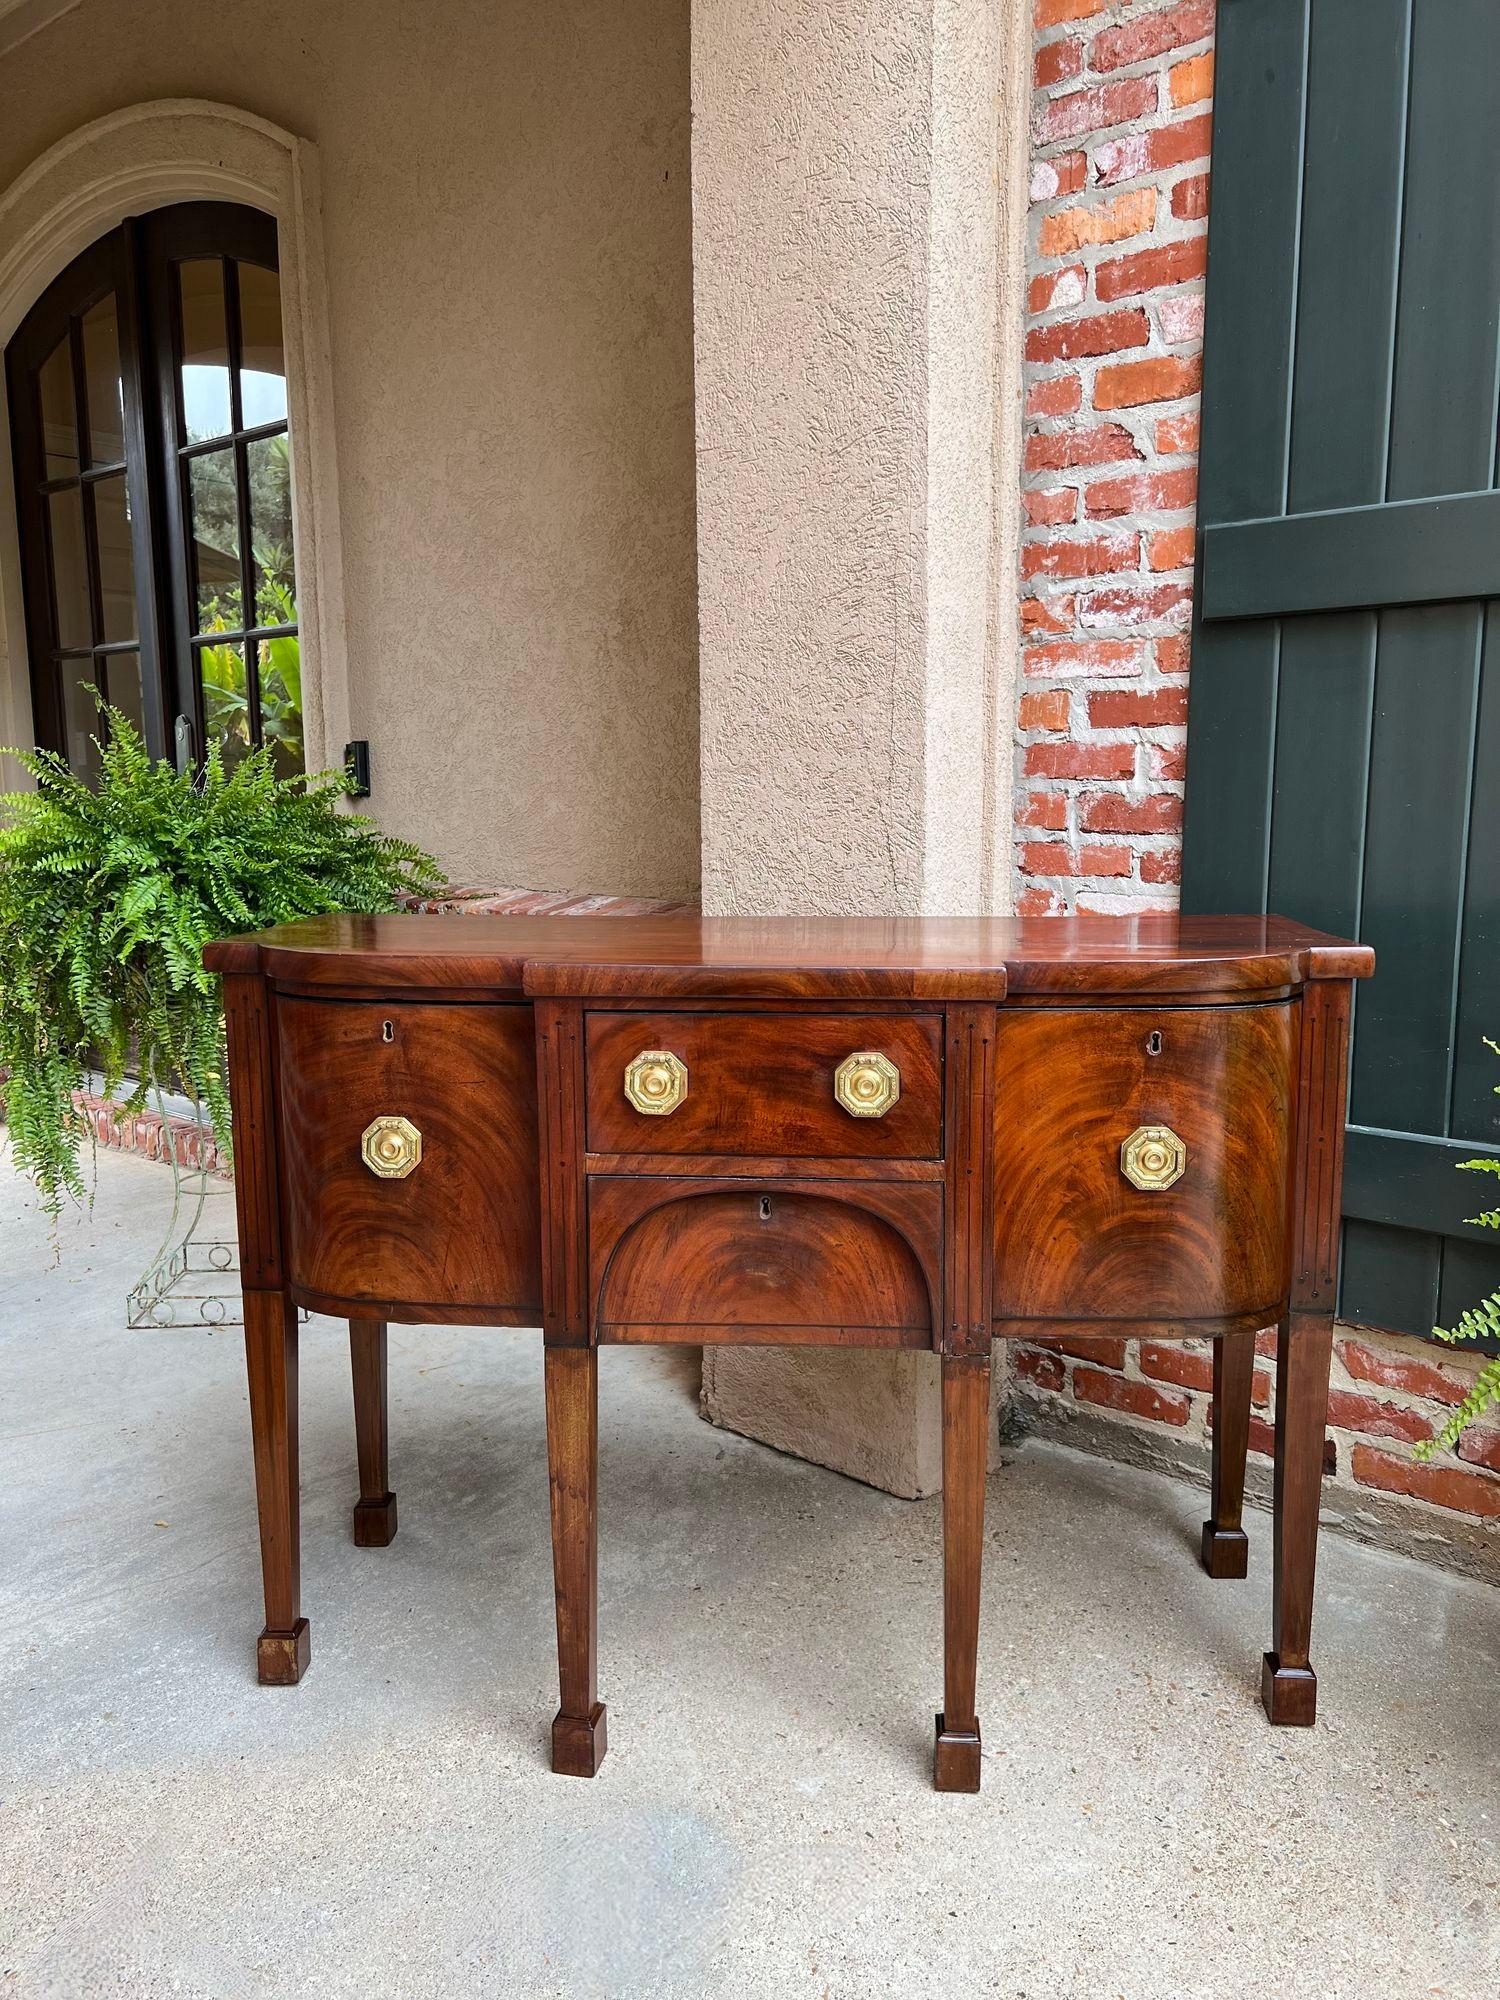 Antique English Flame Mahogany Buffet Sideboard Regency Neoclassical Style.

Direct from England, and full of British elegance and style, very “regency” or “neoclassical”. The shape is fabulous, with a serpentine front – notice even the side doors